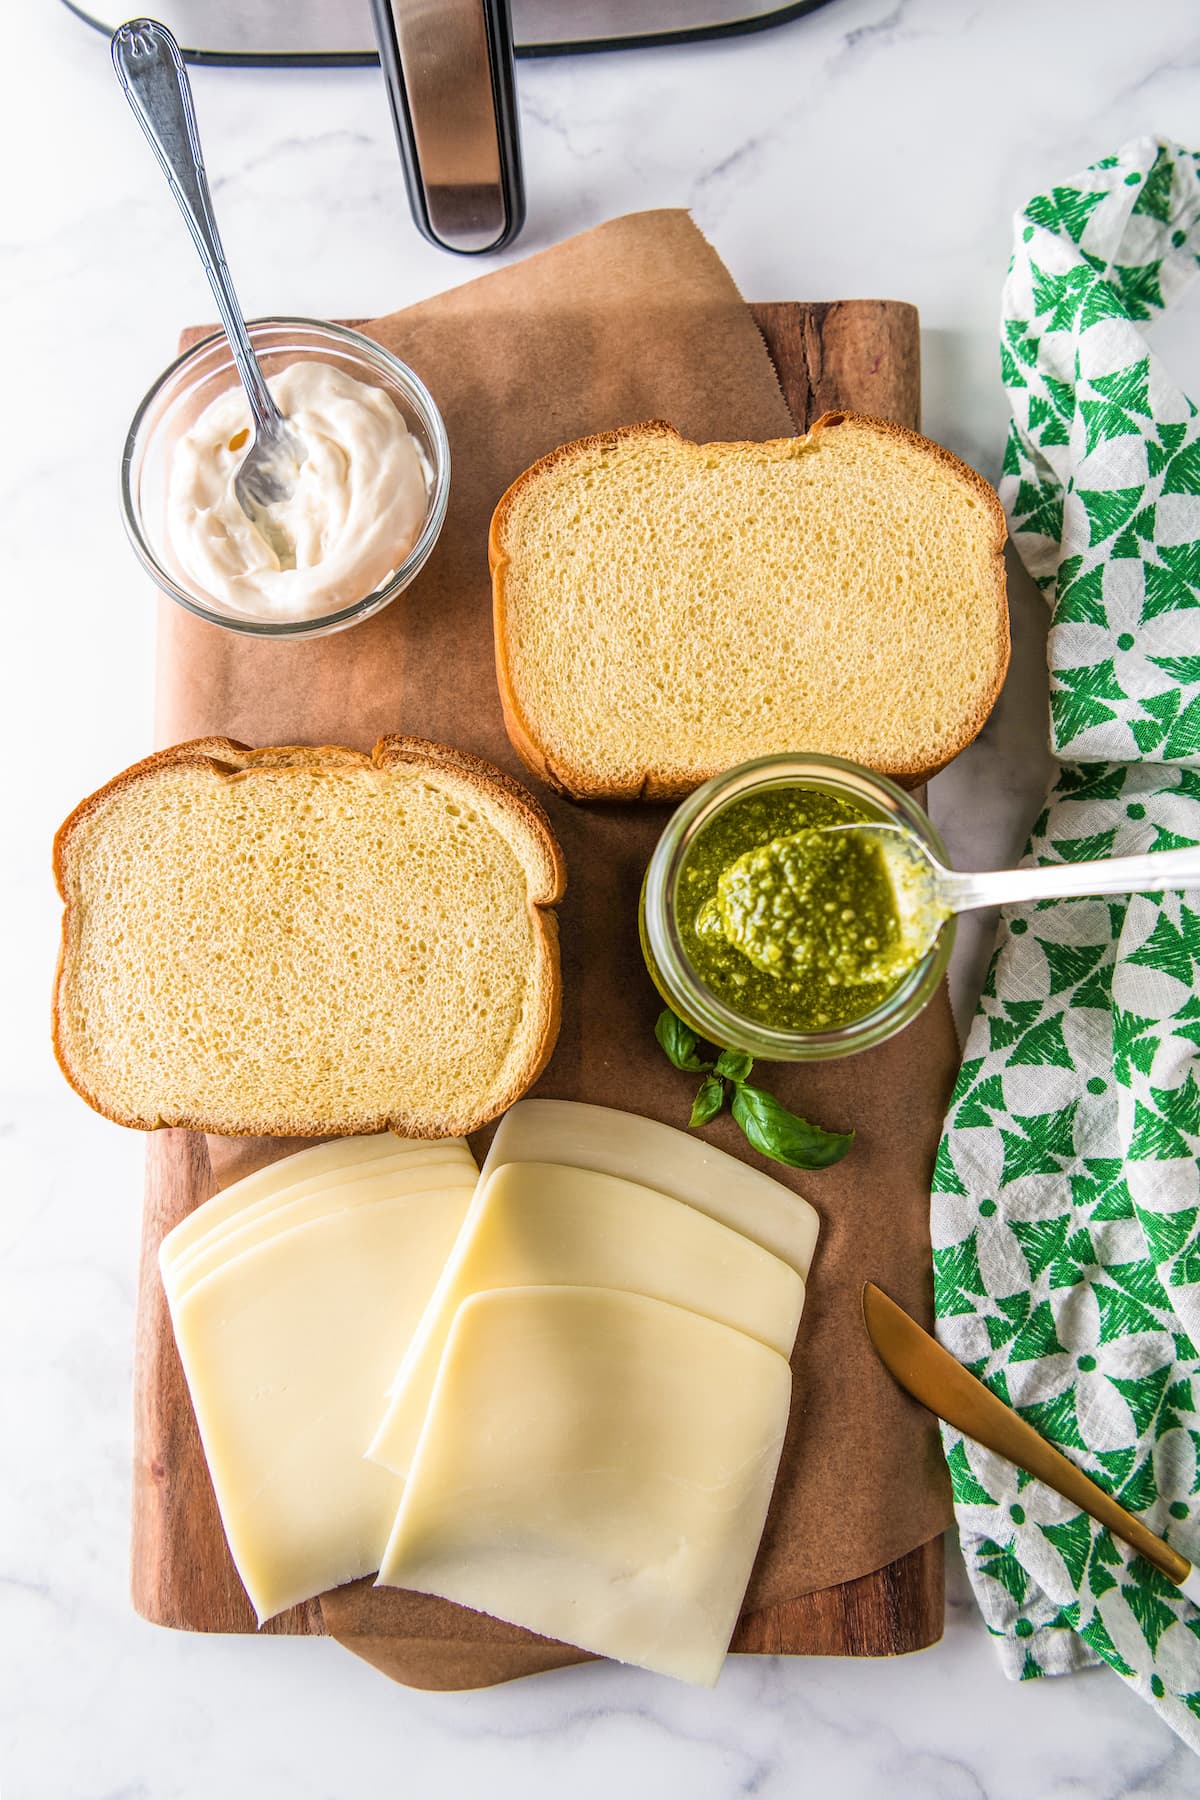 a cutting board with mayo, pesto, sliced cheese, and two slices of bread